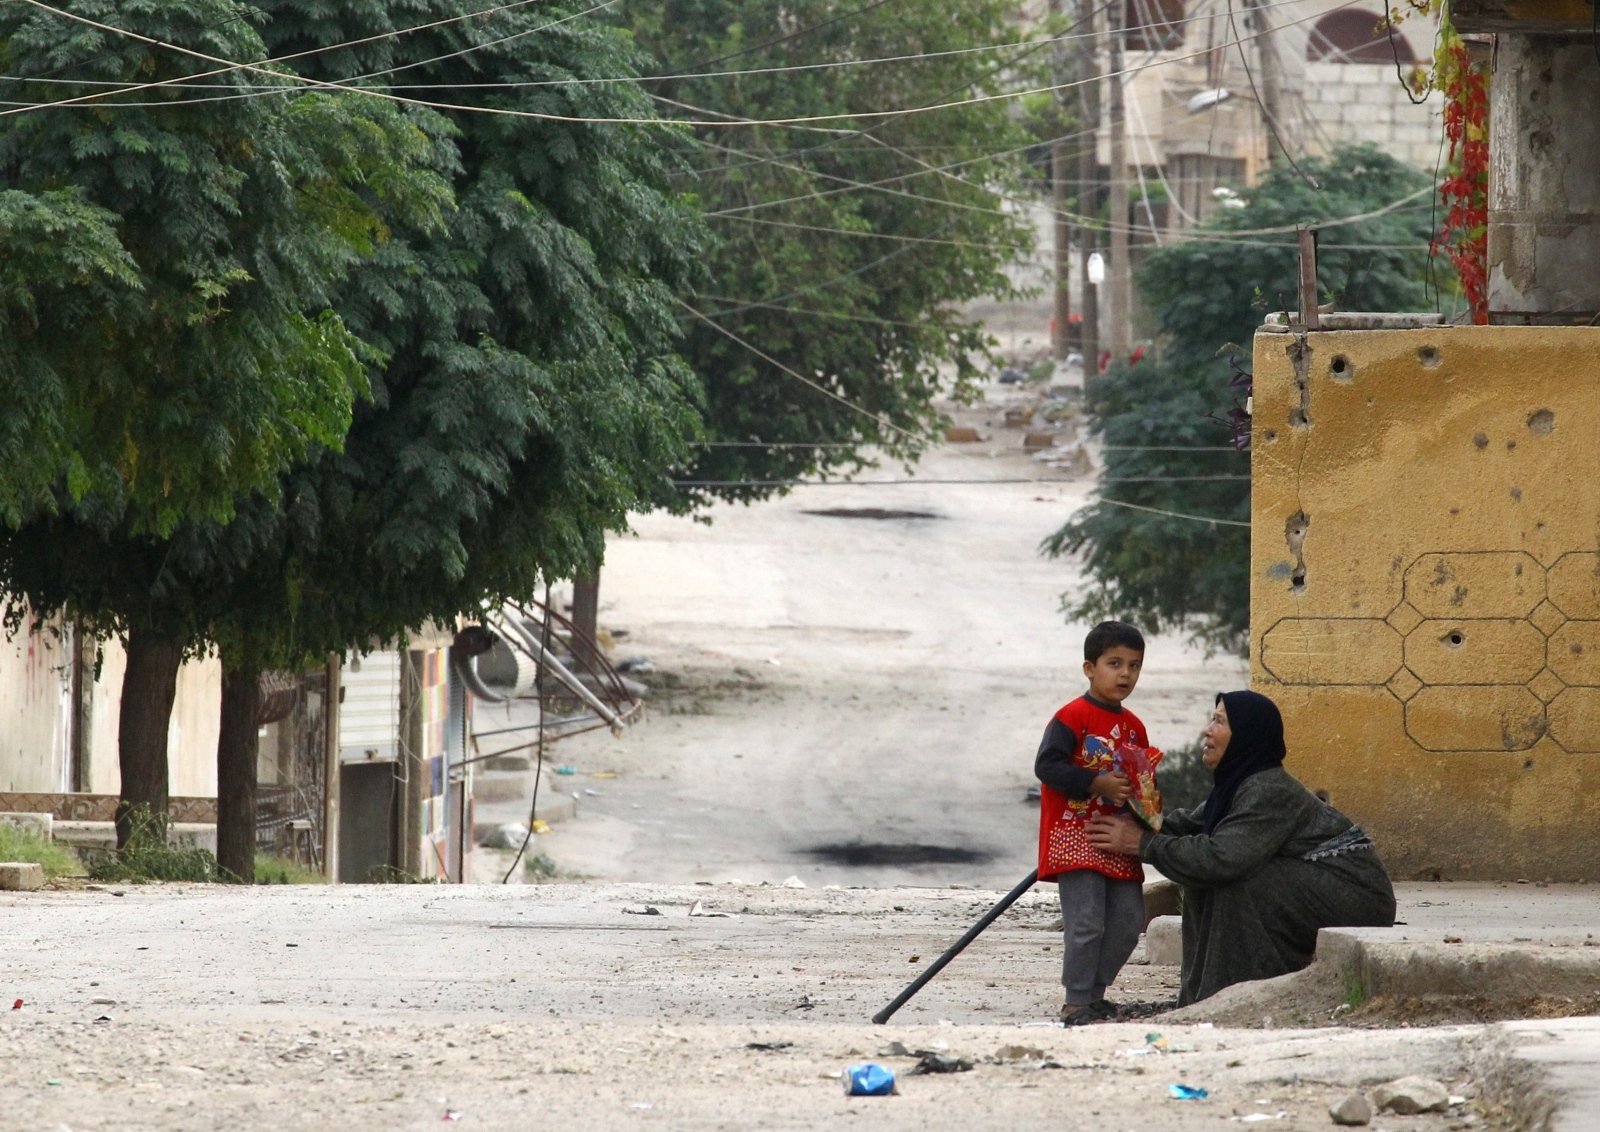 An elderly woman and a child are seen along a deserted street in the town of Ras al-Ain An elderly woman and a child are seen along a deserted street in the town of Ras al-Ain, Syria October 24, 2019. REUTERS/Aboud Hamam ABOUD HAMAM